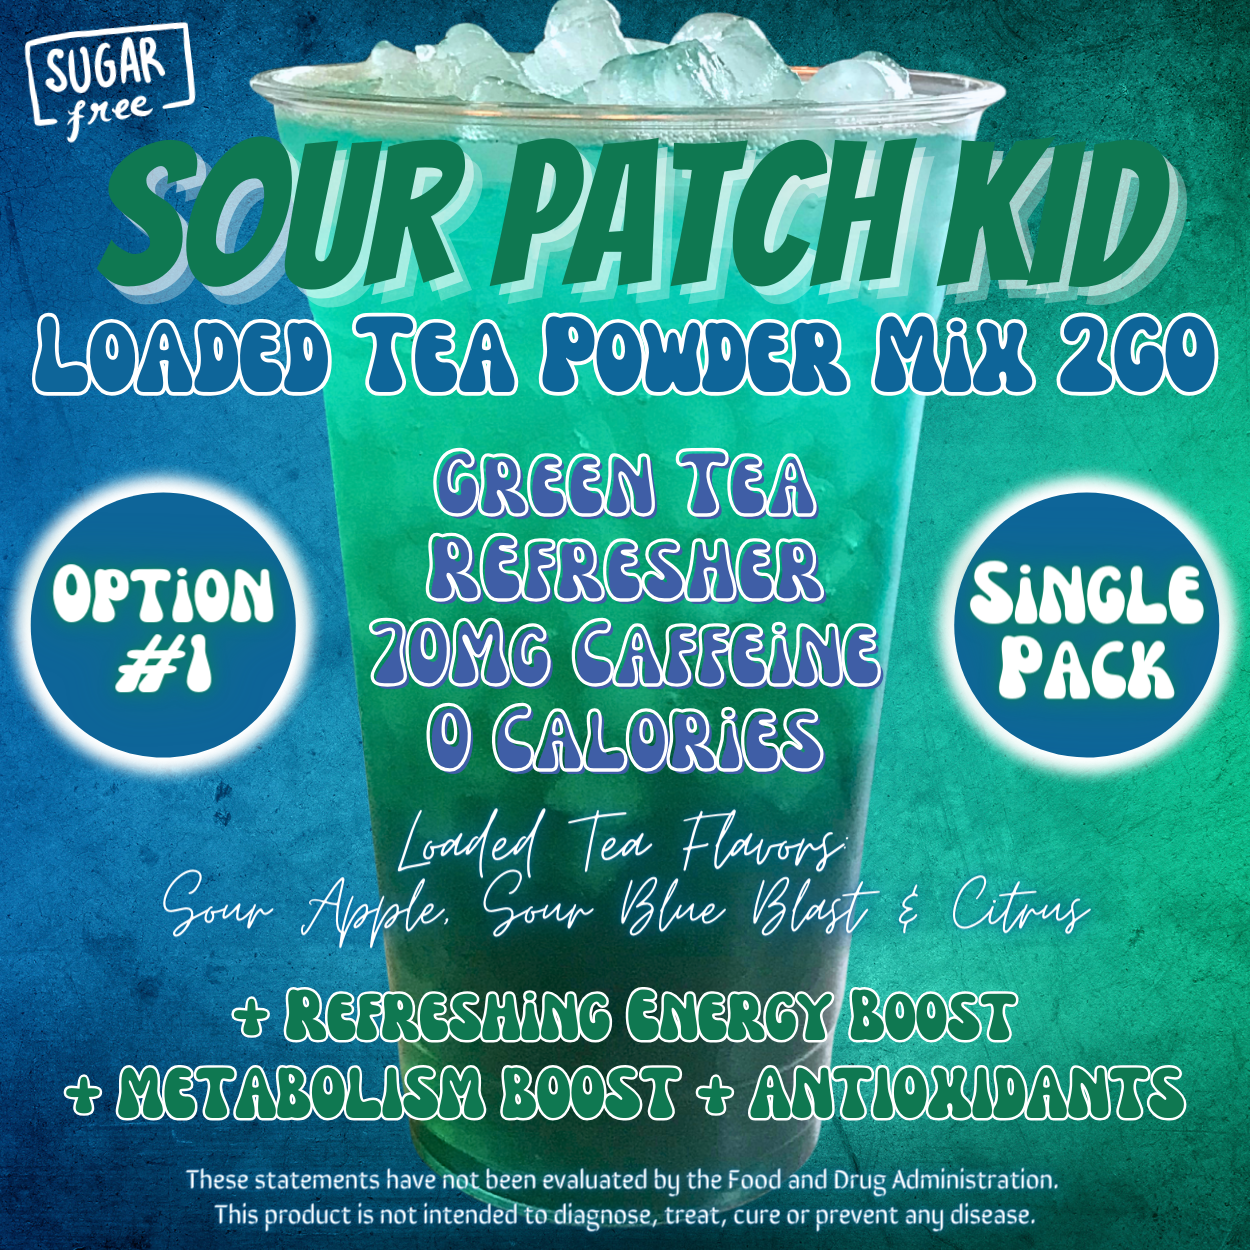 Sour Patch Kid: Loaded Tea Powder Mix 2GO Packets